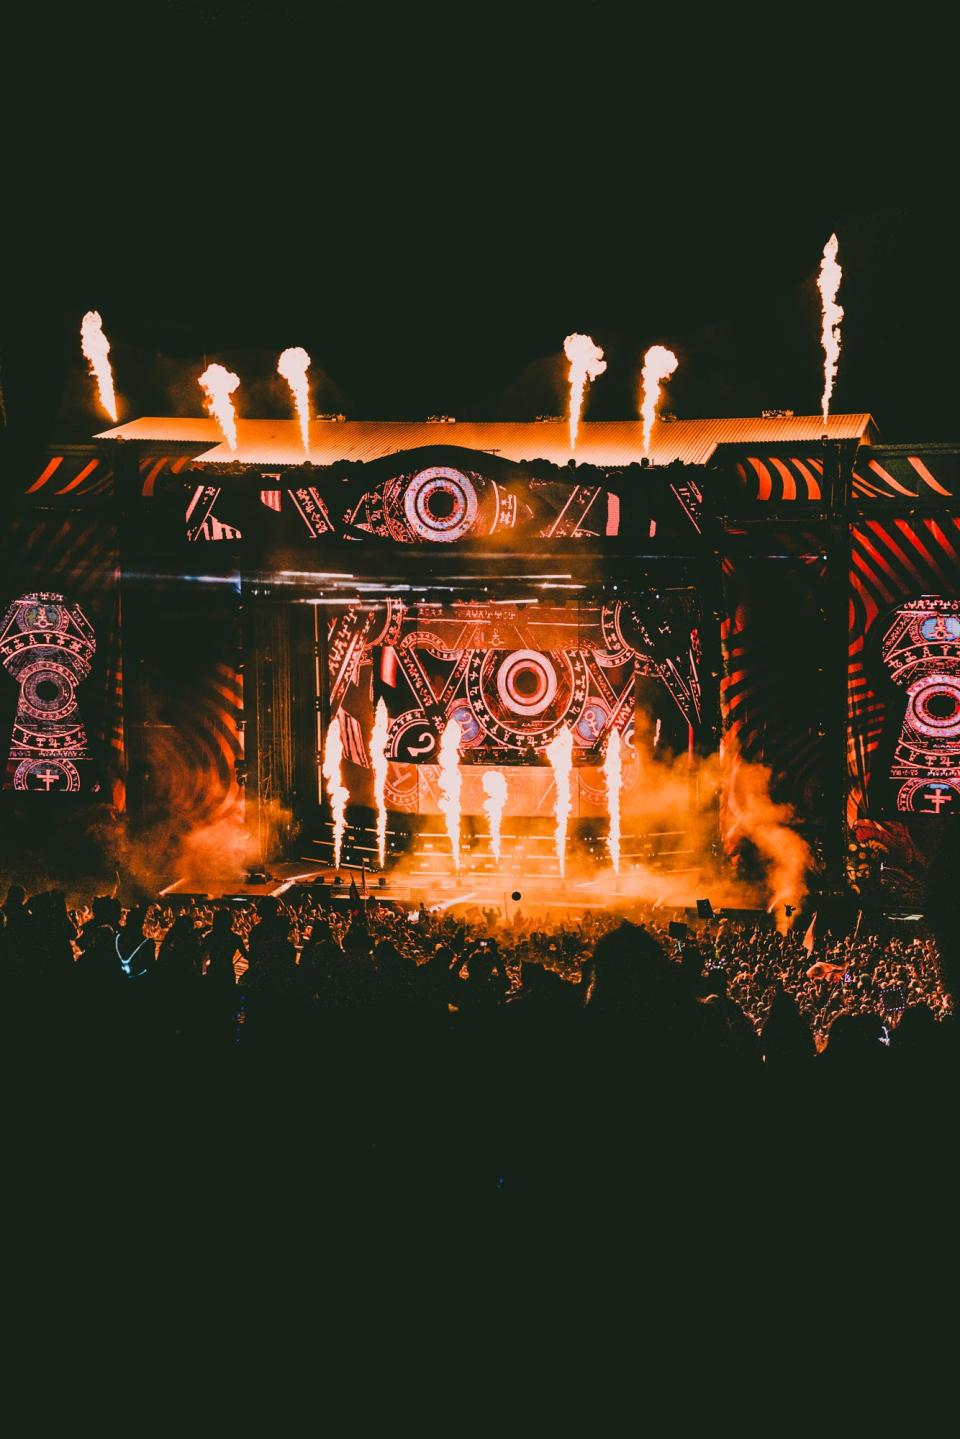 Canadian DJ Rezz, seen here headlining the Beyond Wonderland Festival in Gorge, Washington in 2021, will headline night one of IllFest at the Concourse Project.